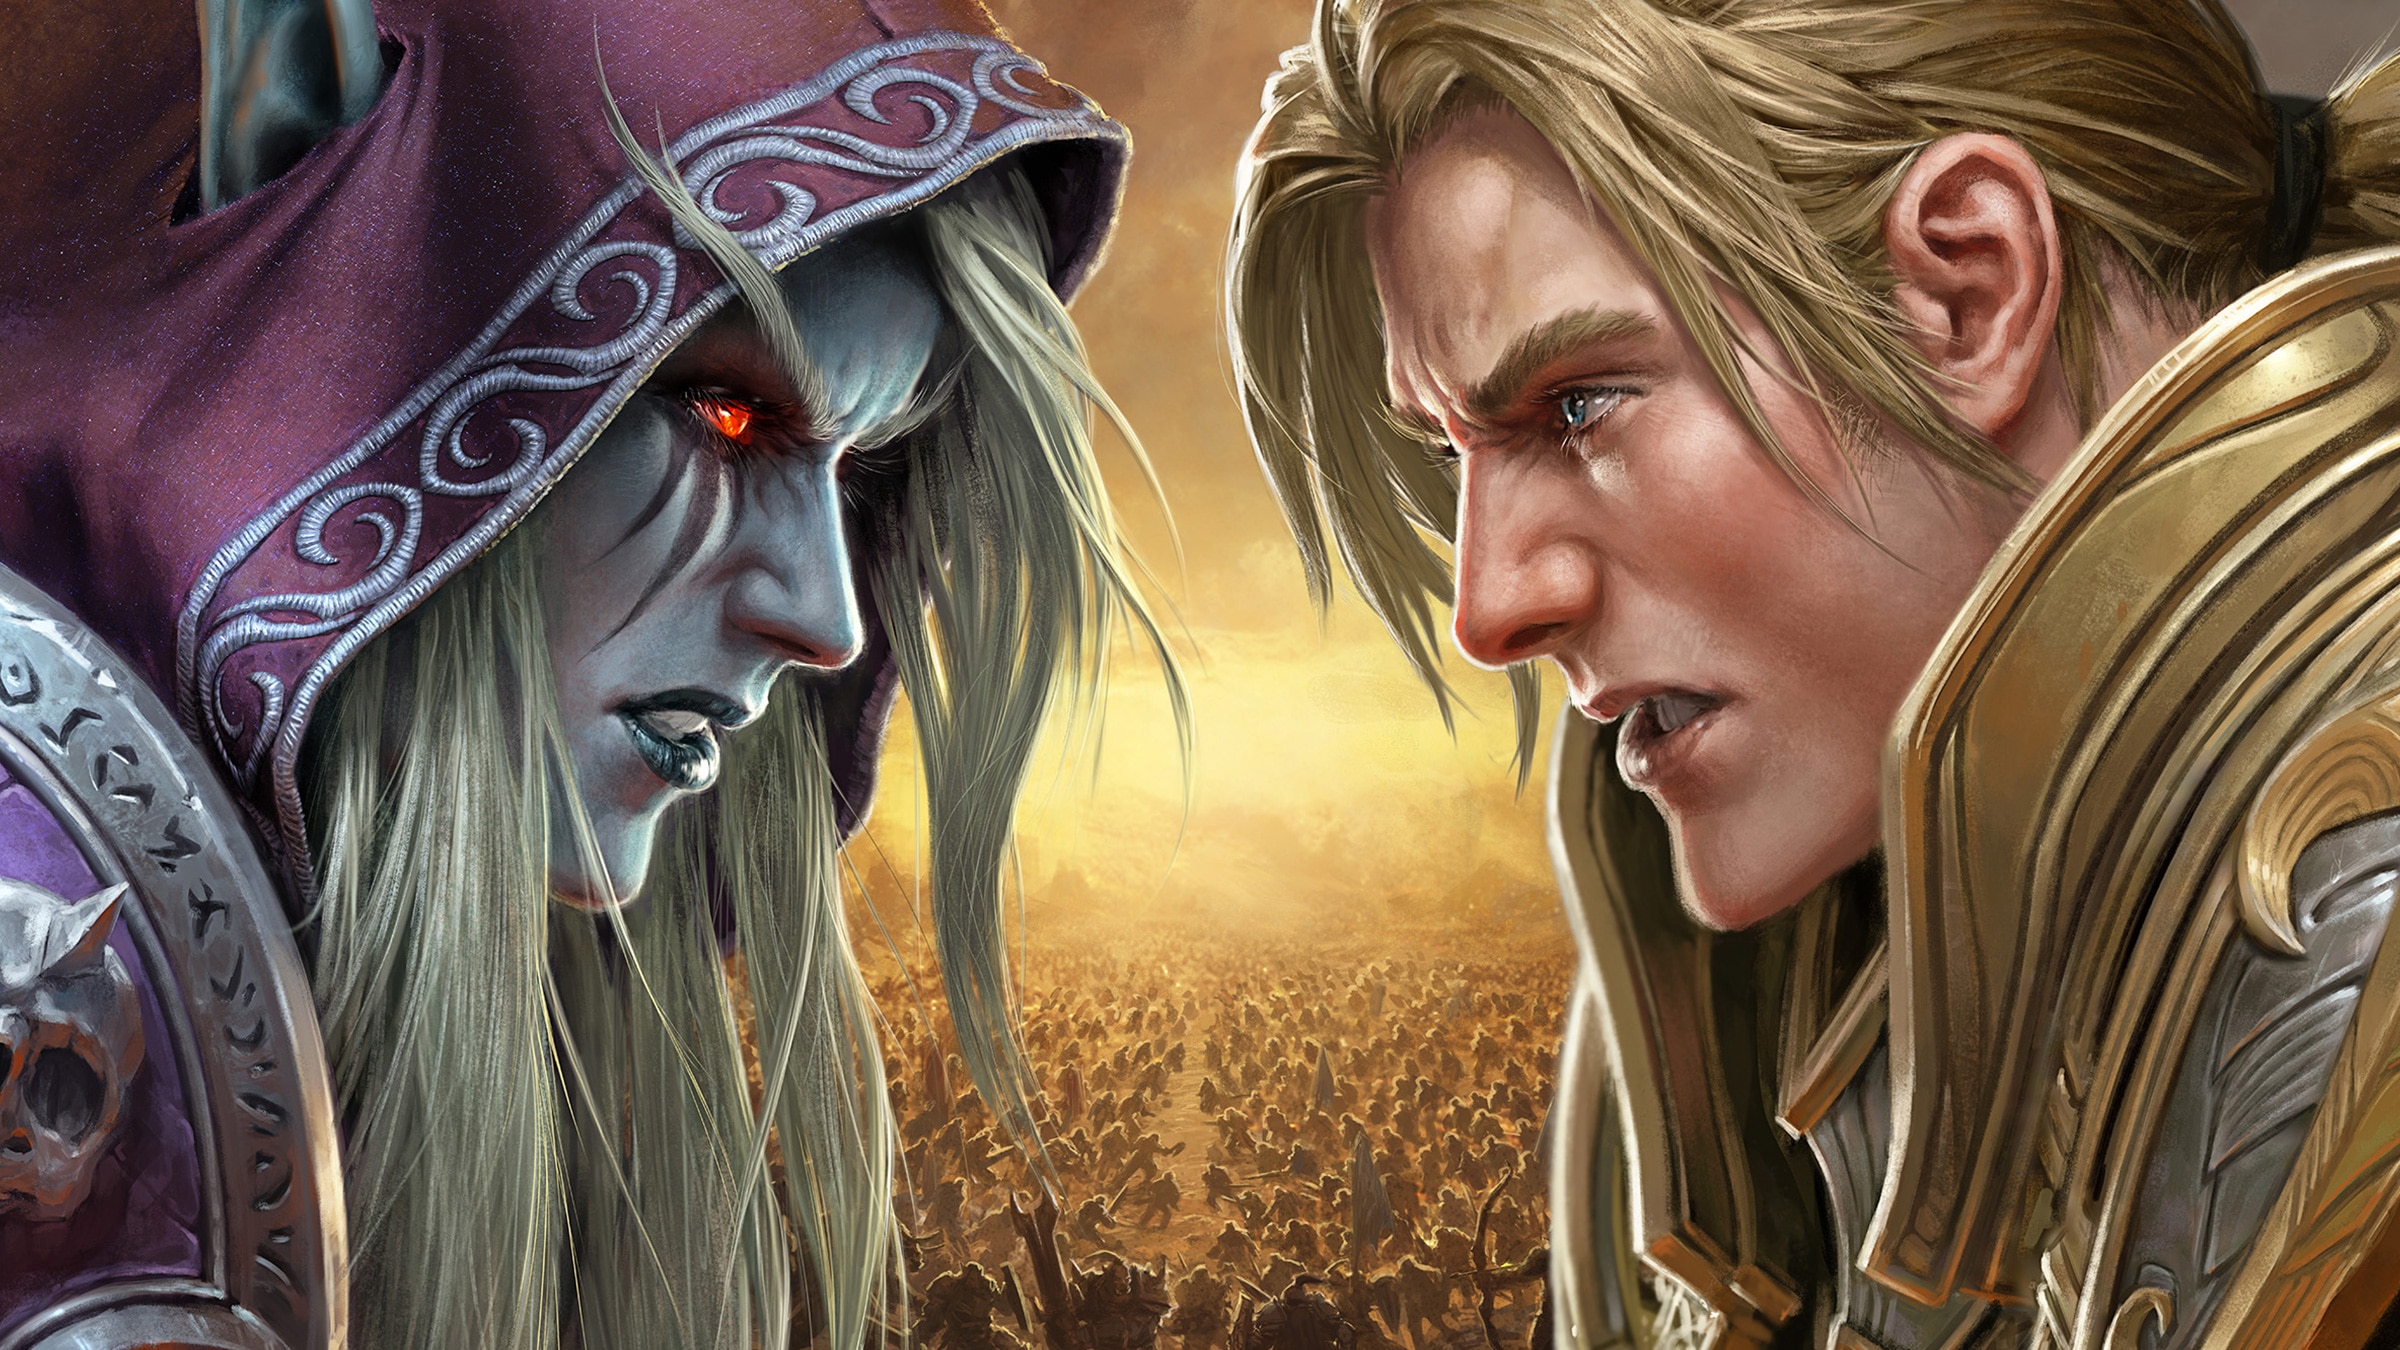 Take Part in the Battle for Azeroth Beta Giveaway!